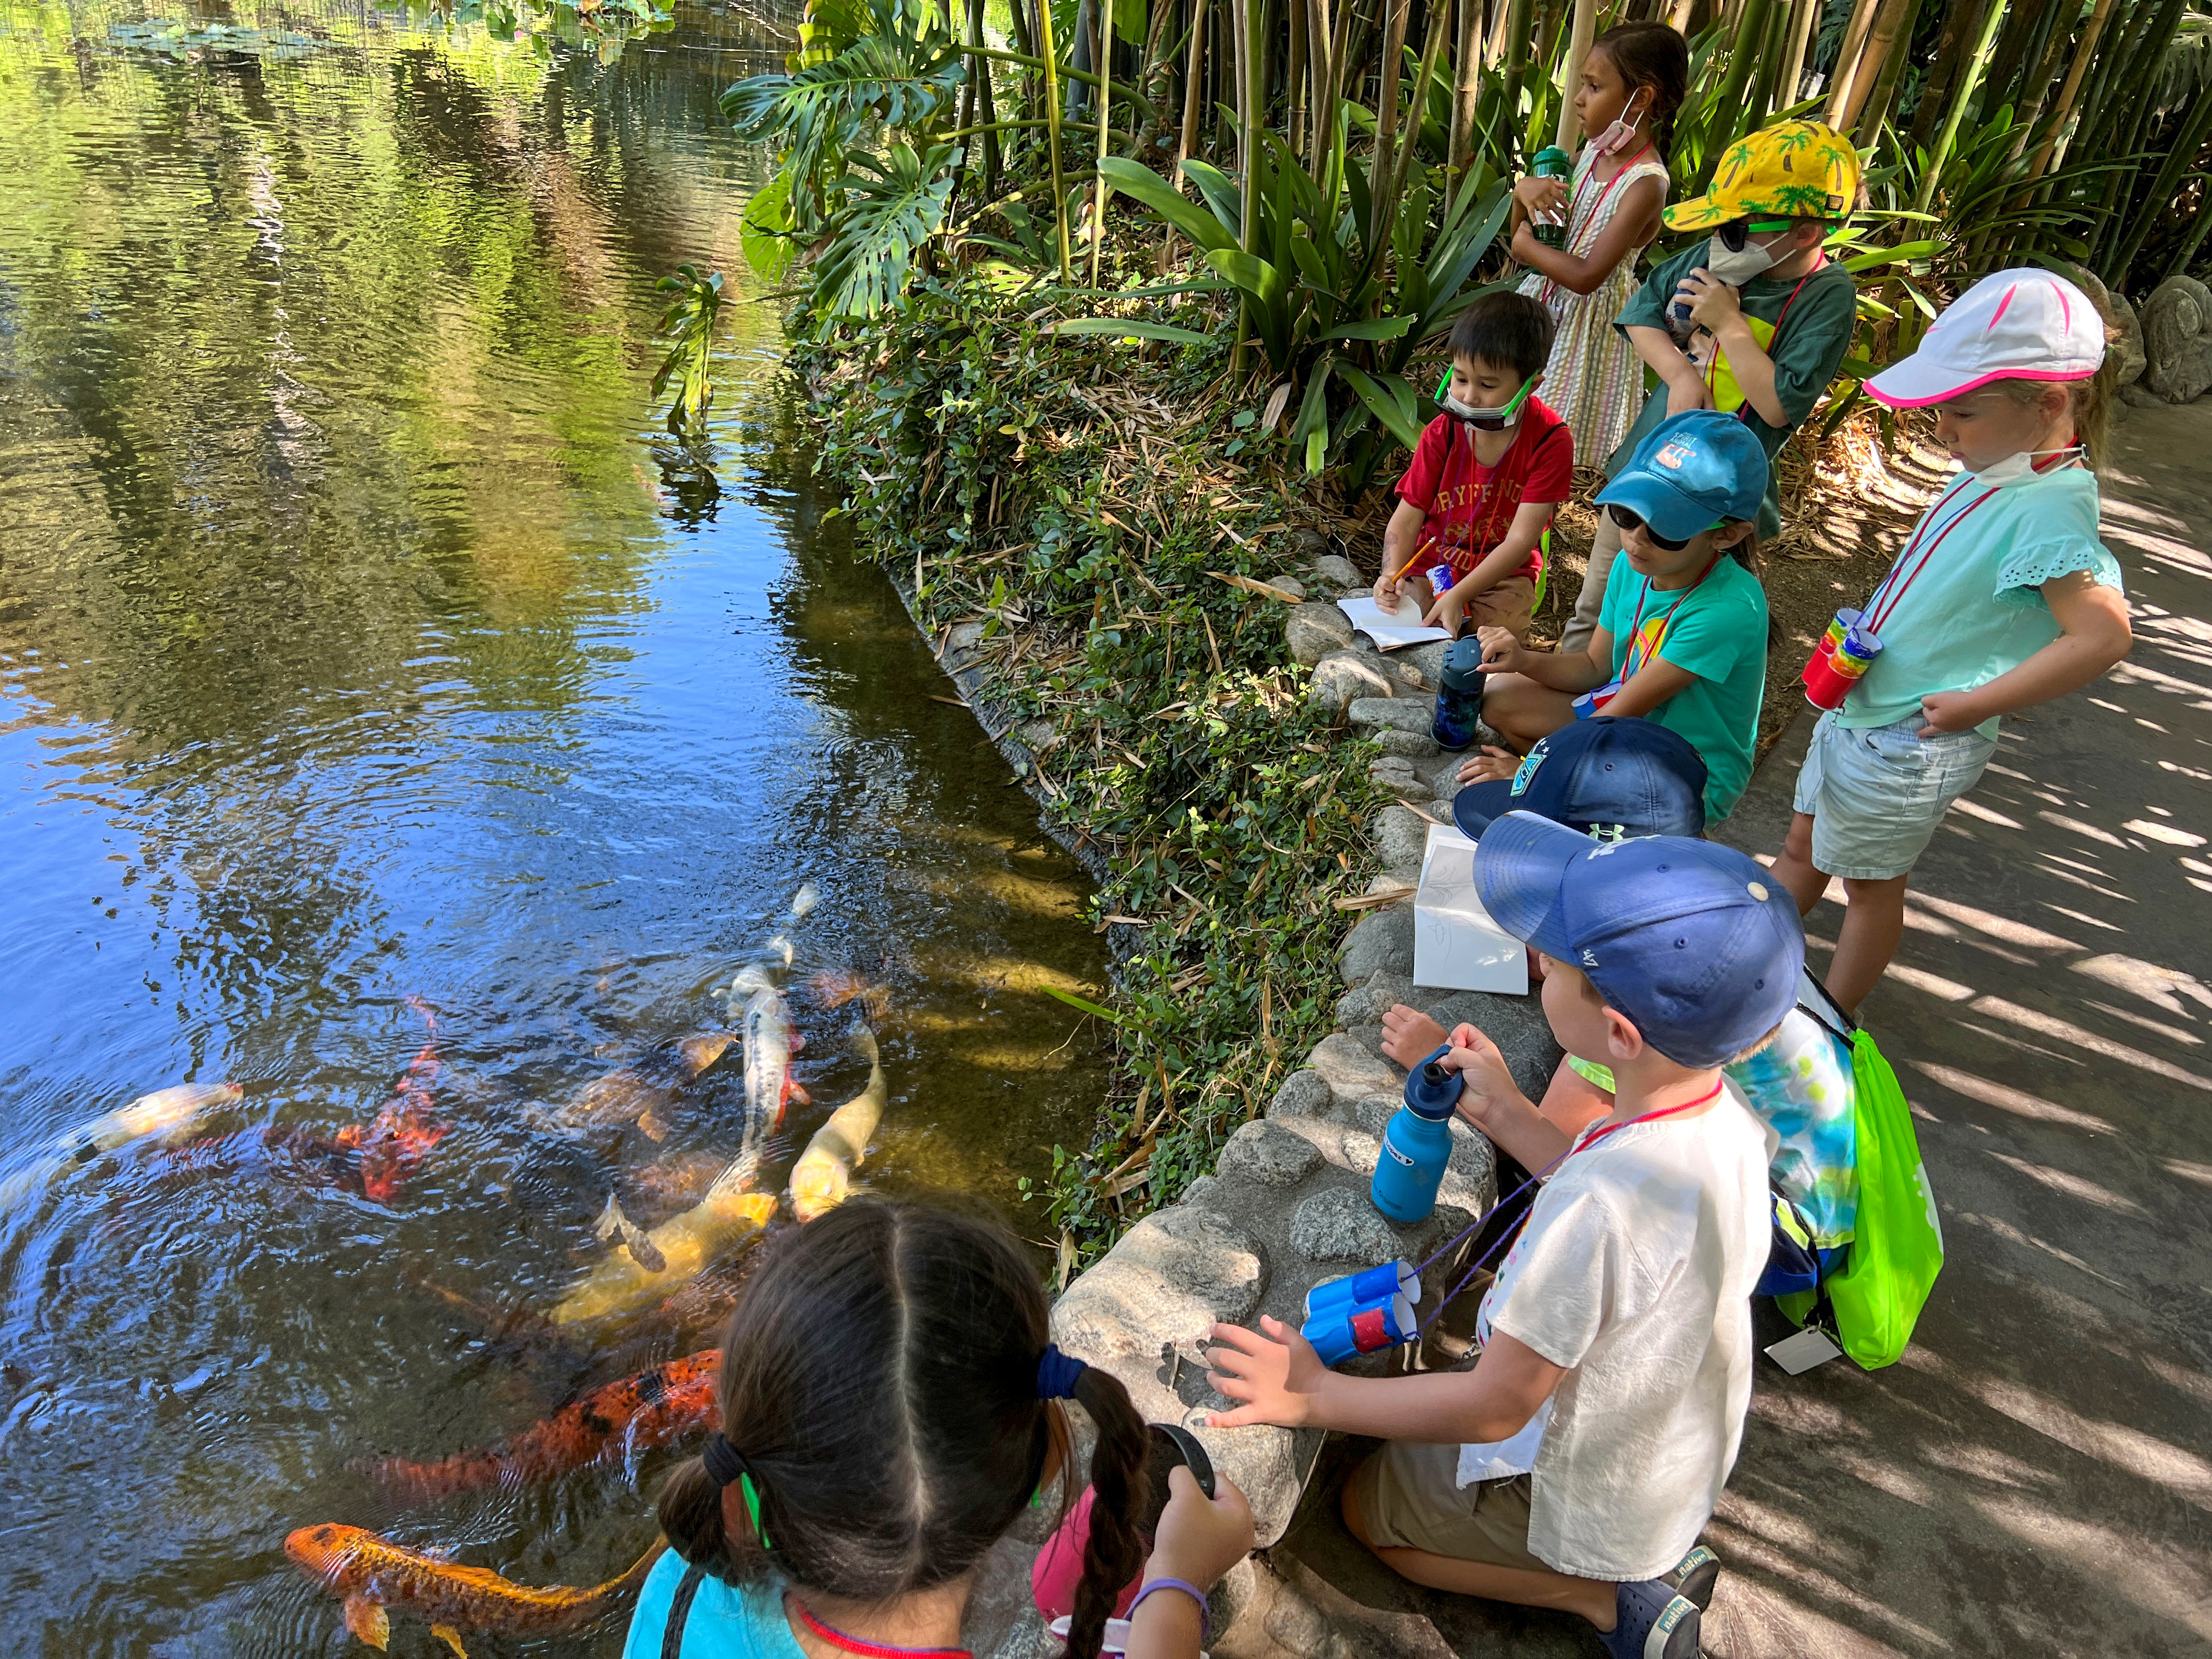 A group of children stand near a pond with koi fish.